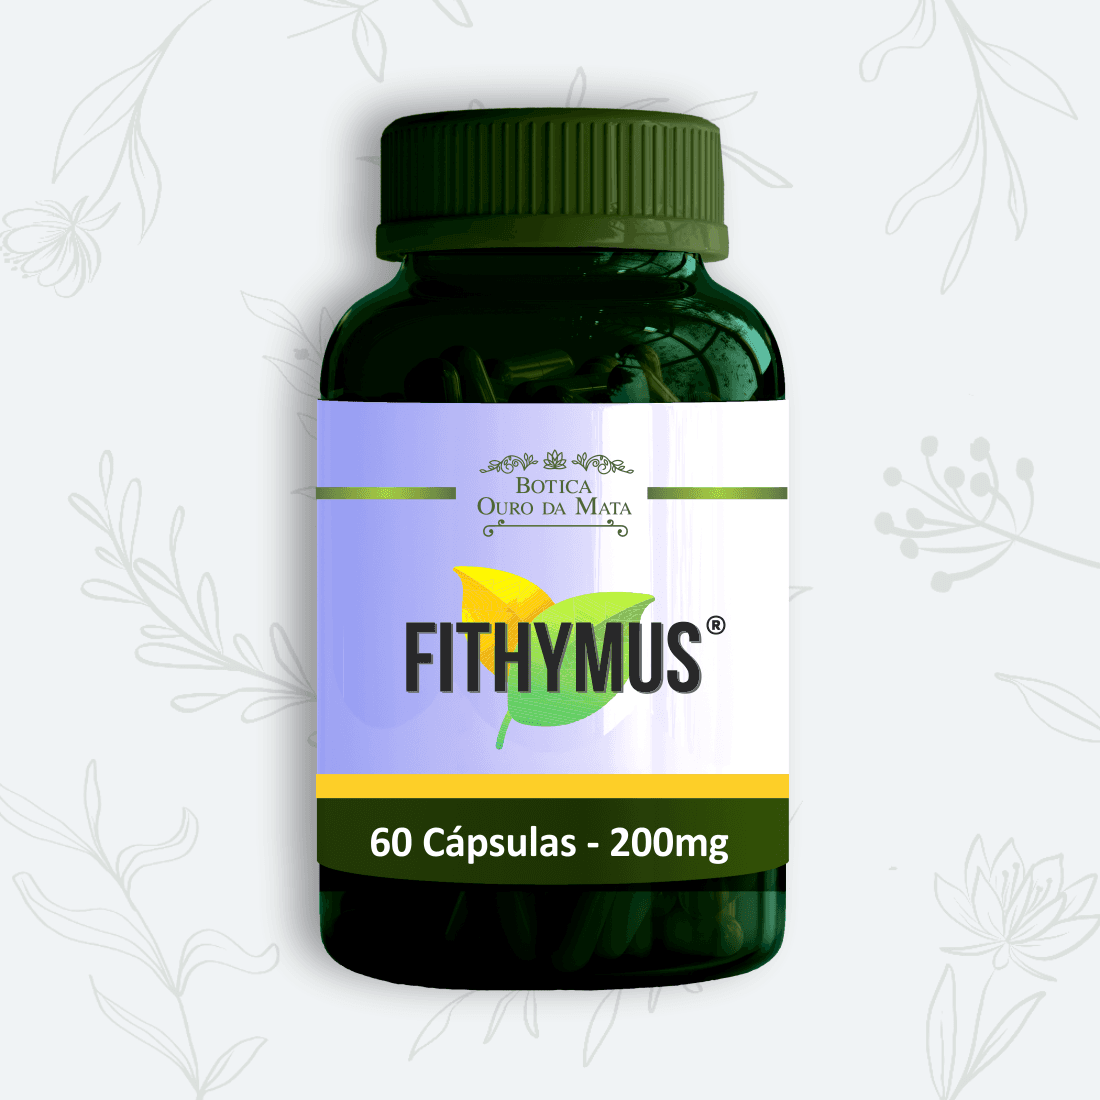 Fithymus